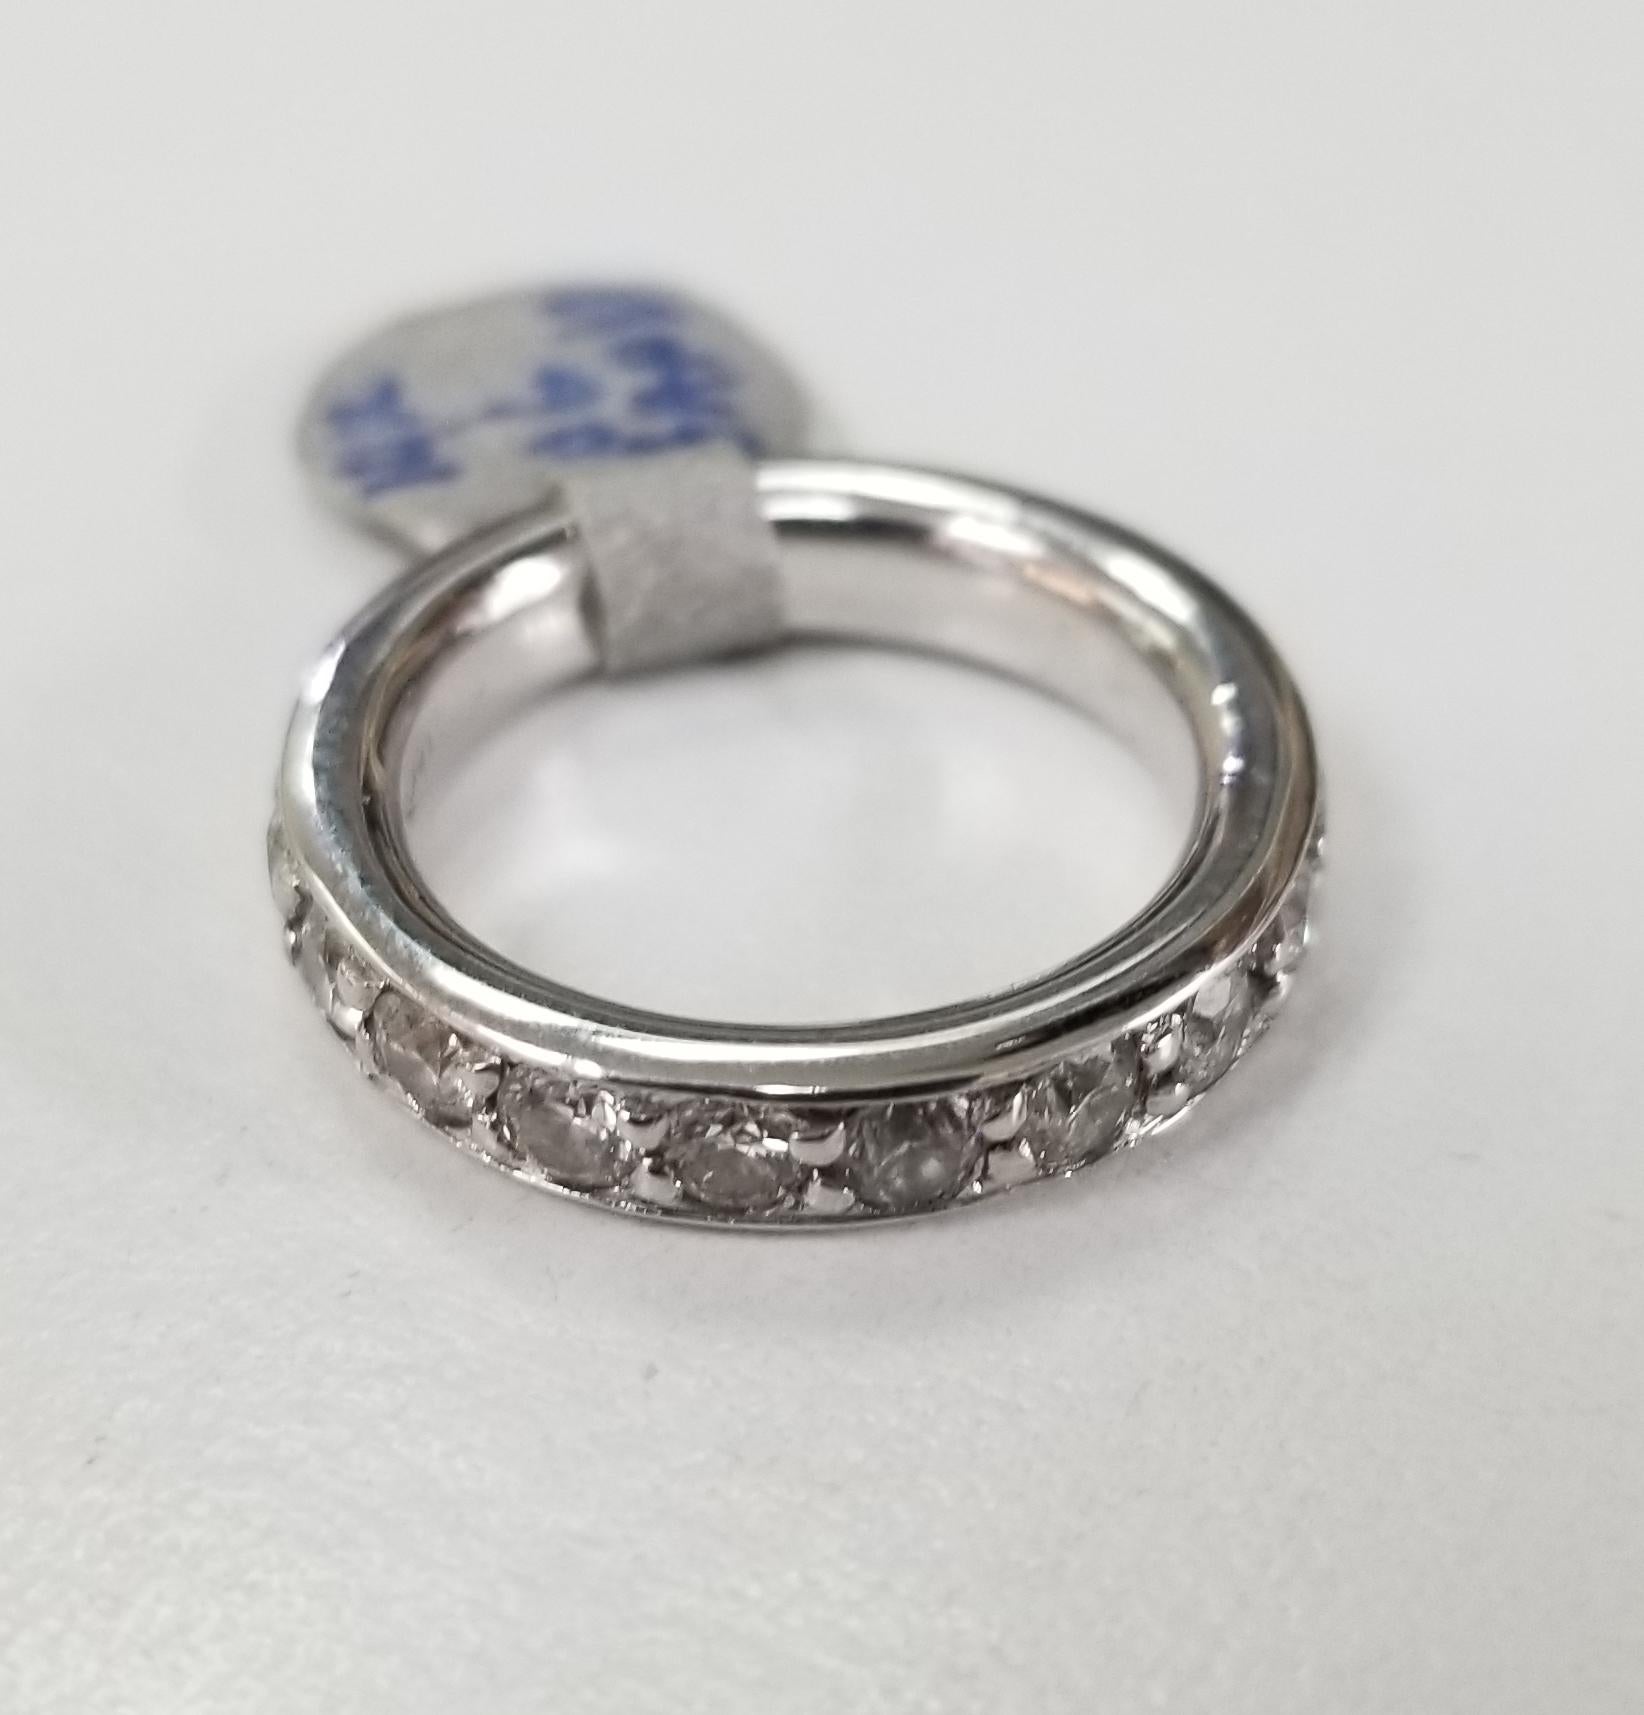 14k white gold 4mm wide and 2.5mm tall Diamond eternity ring with 2.05cts., containing 19 round full cut diamonds of nice quality weighing .2.05cts. ring is a size 4 3/4.